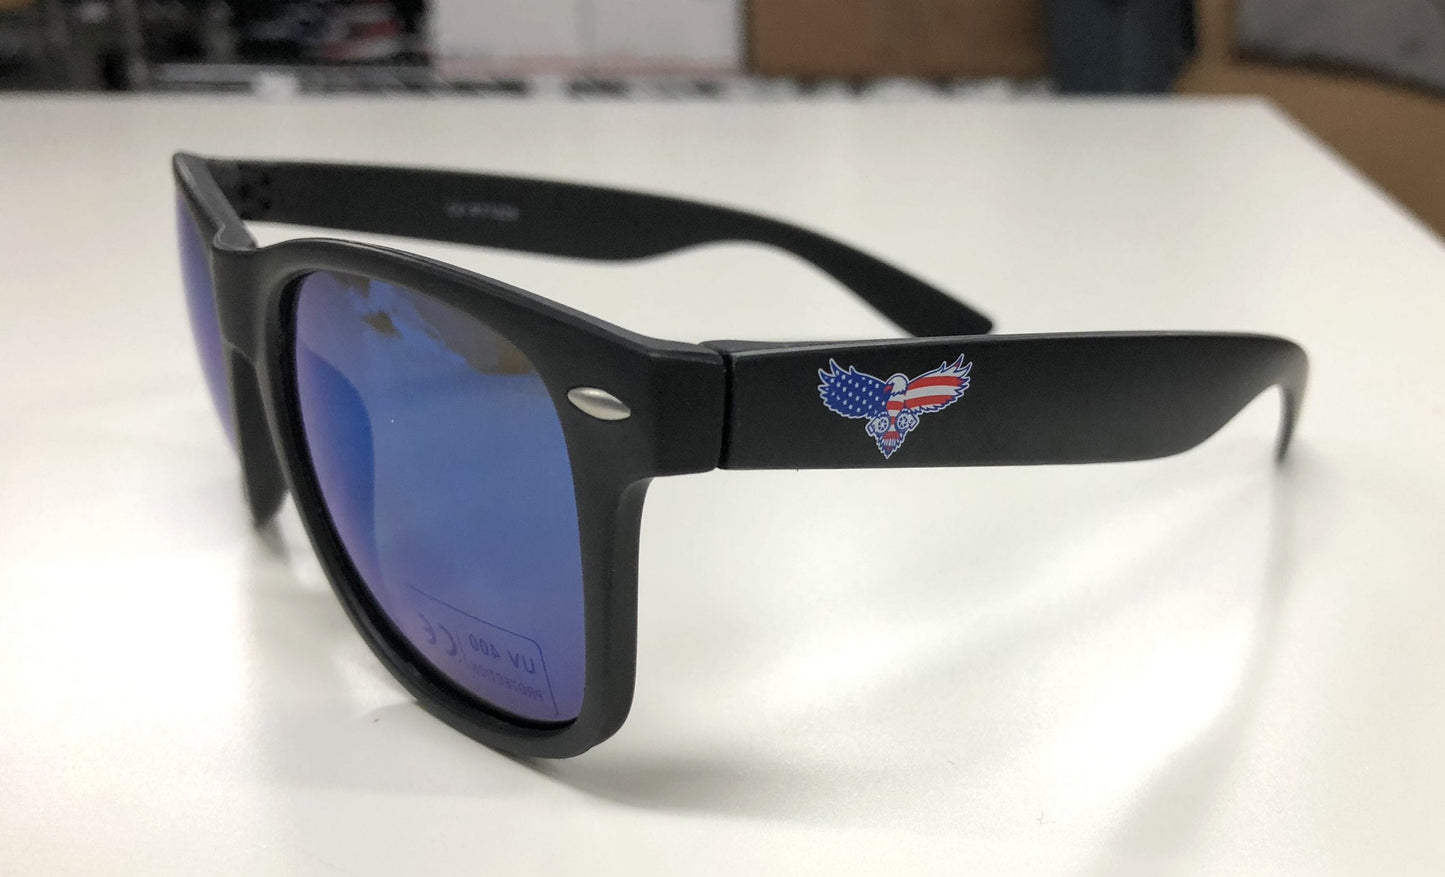 "Hell Yeah Brother" Bald Eagle Sunglasses